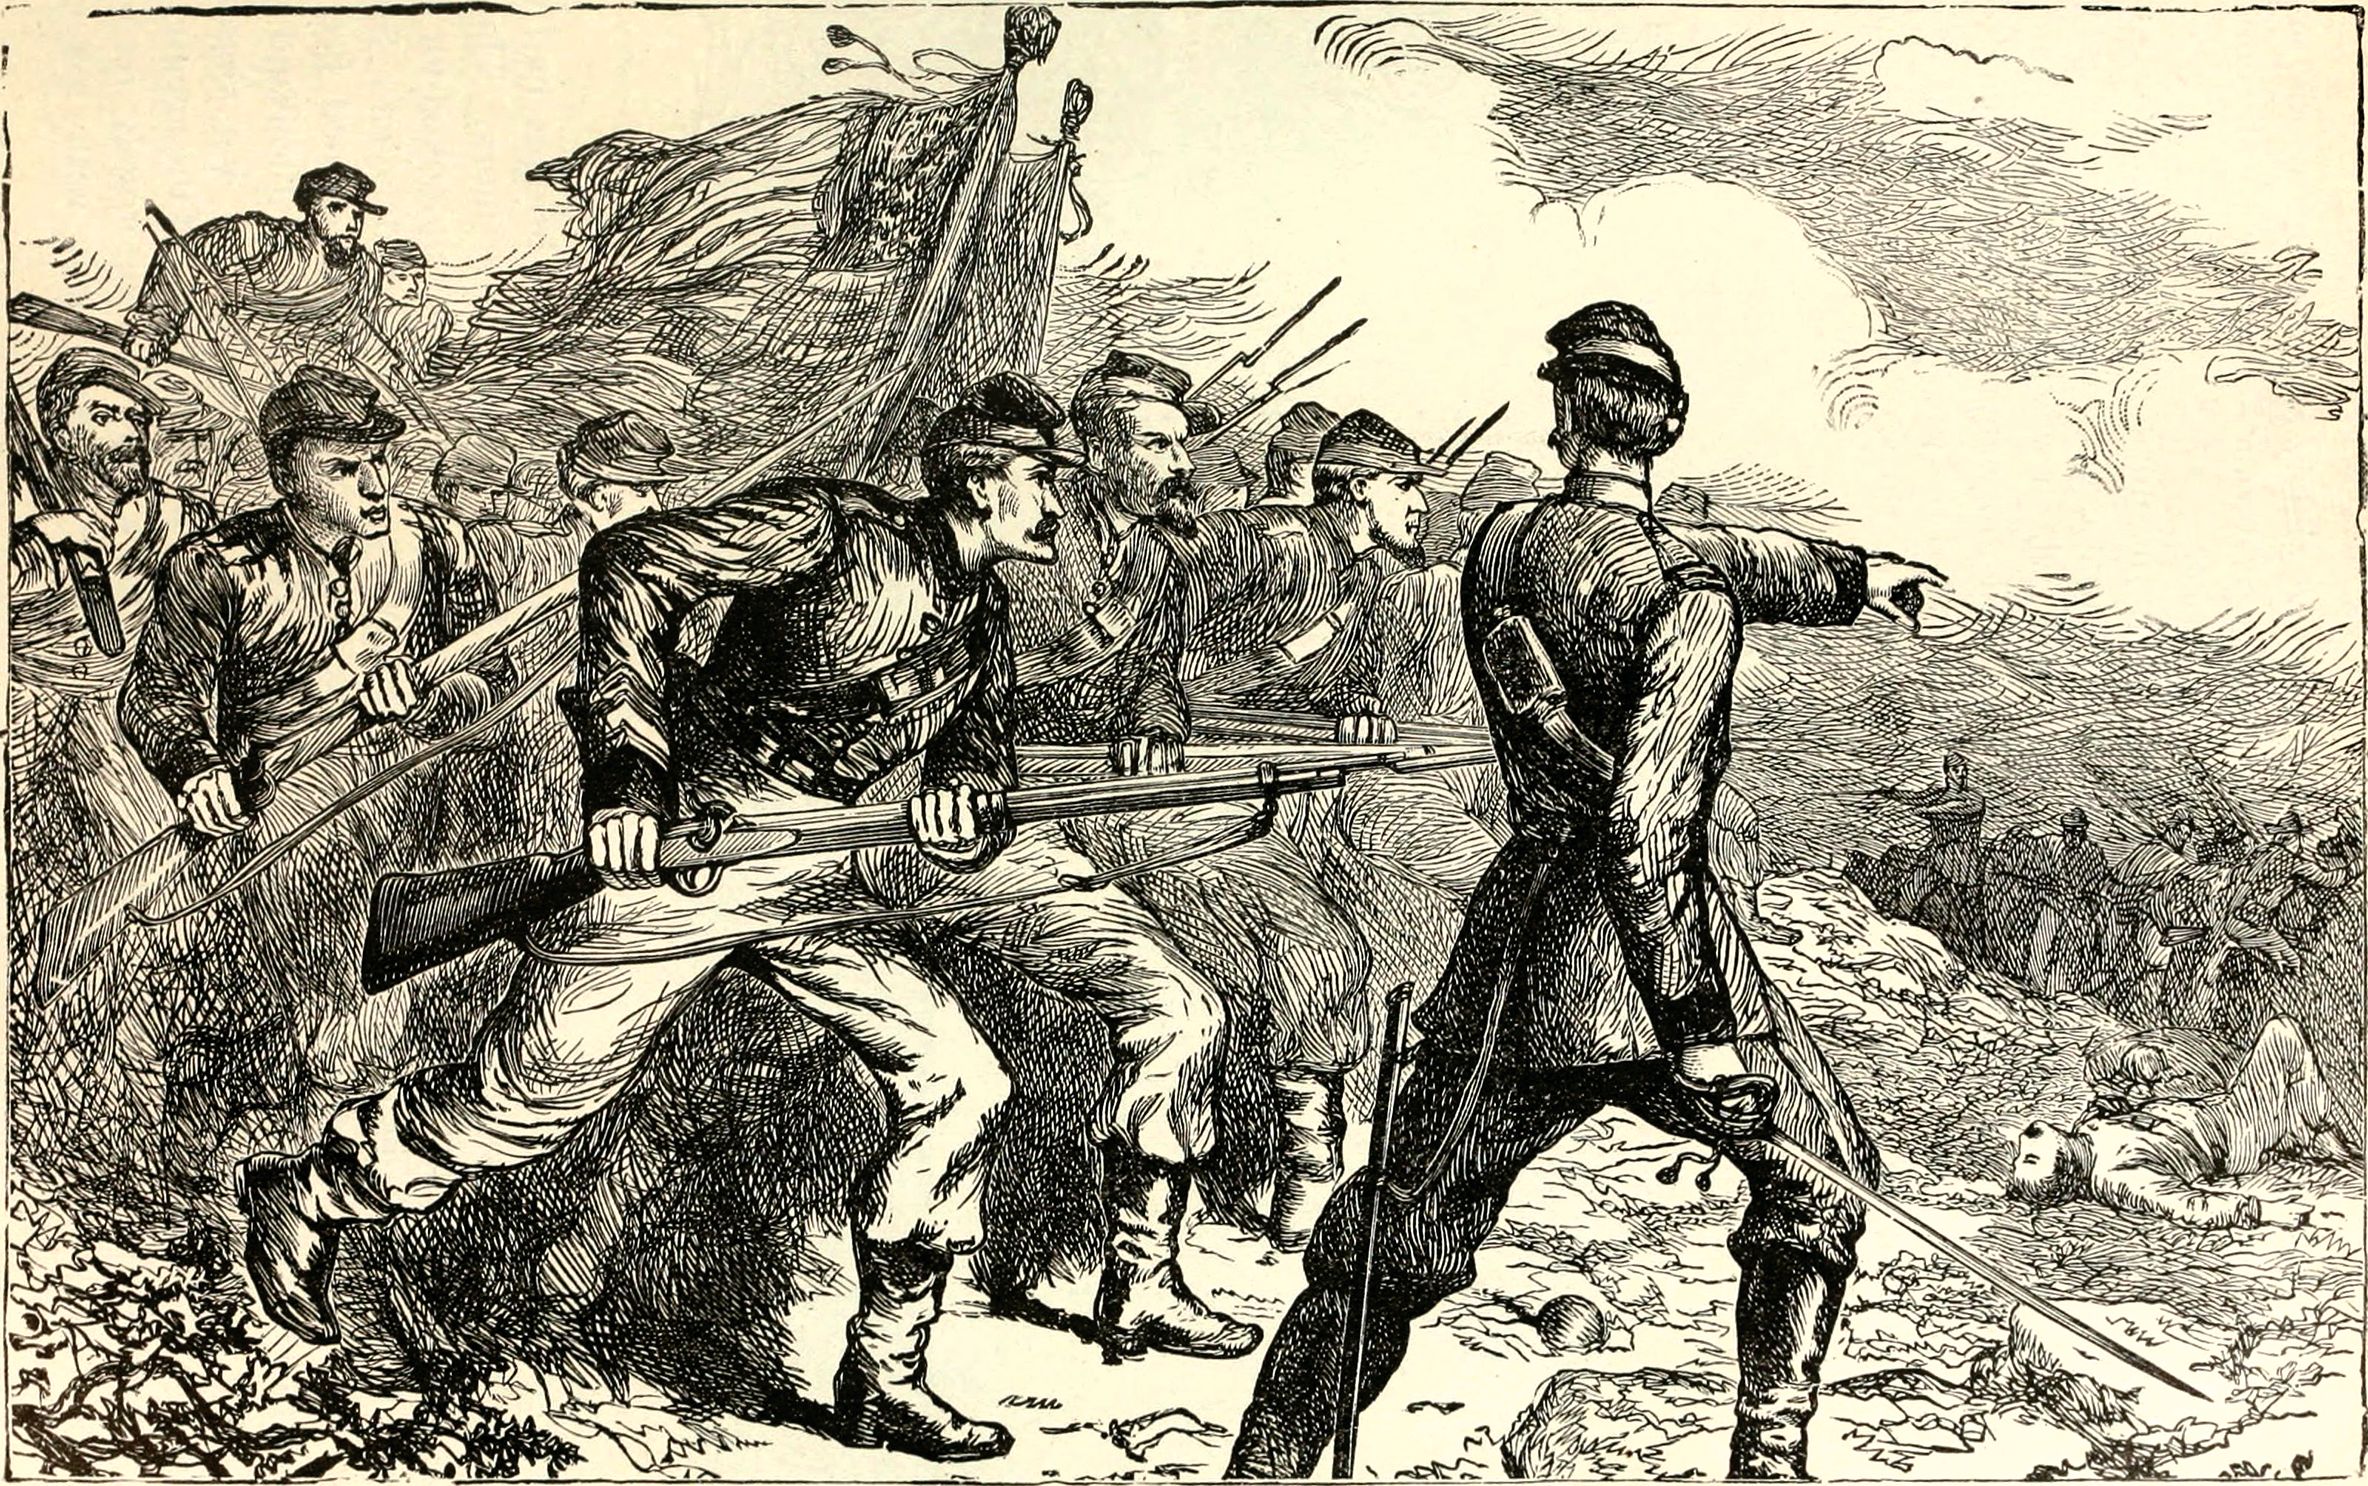 Under the command of General Van Dorn, the Confederates penetrated several forts along the perimeter of Corinth, Mississippi, including Battery Powell and Battery Robinett—even breaking through into downtown, where fighting raged around the railroad crossing and the nearby Tishomingo Hotel. Artillery and a charge by Union reserves, such as the one pictured above, recaptured the batteries and drove the Confederates out of the town. The number of dead and wounded was high for both sides. 